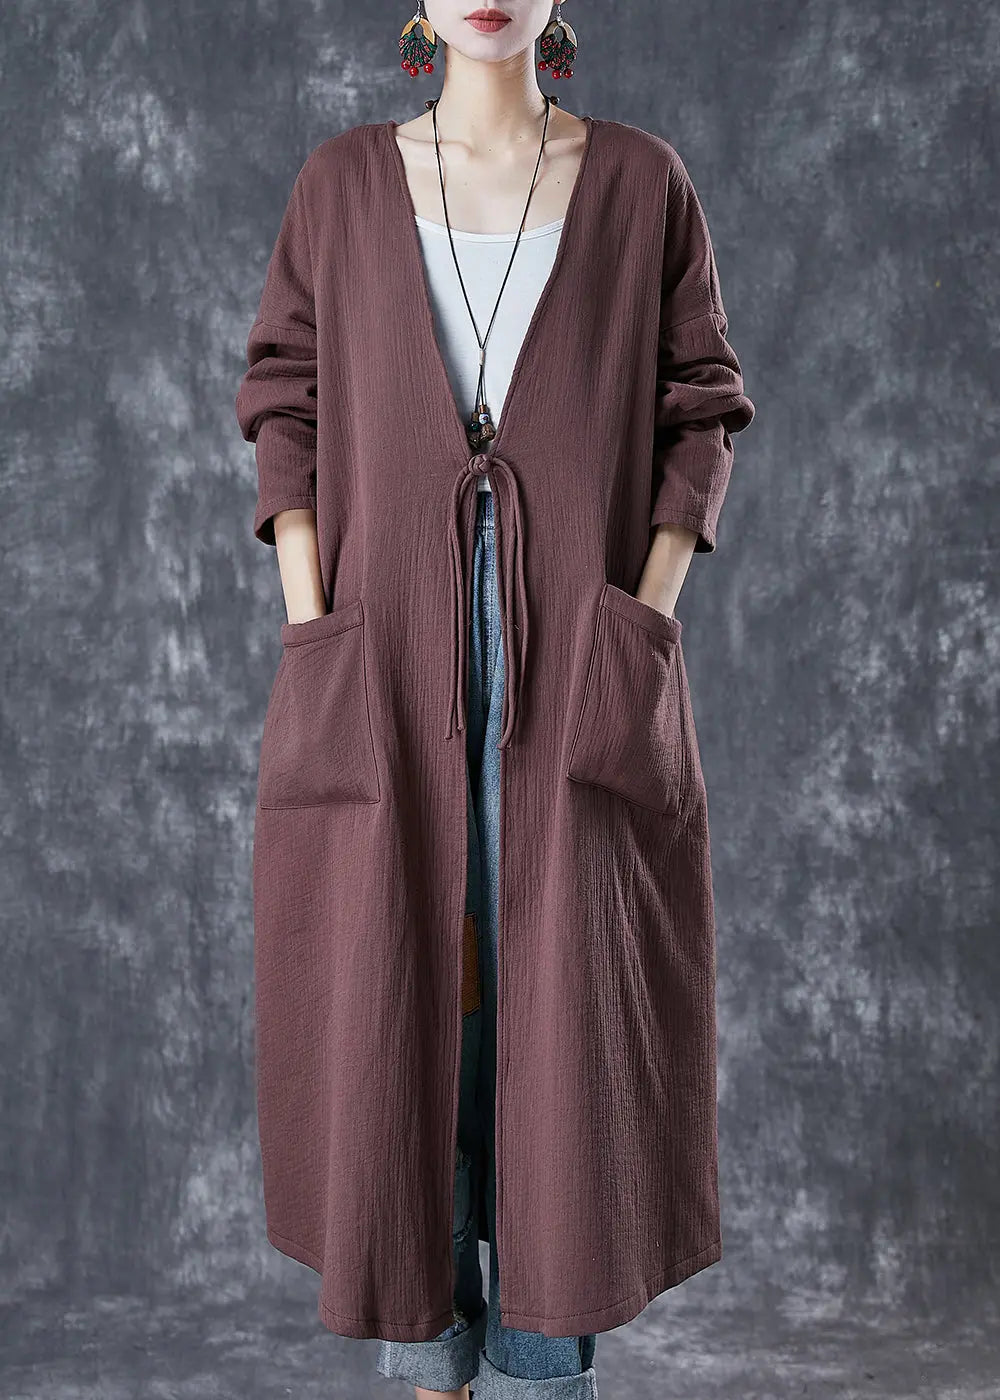 Classy Chocolate Oversized Chinese Button Linen Long Cardigan Spring Ada Fashion